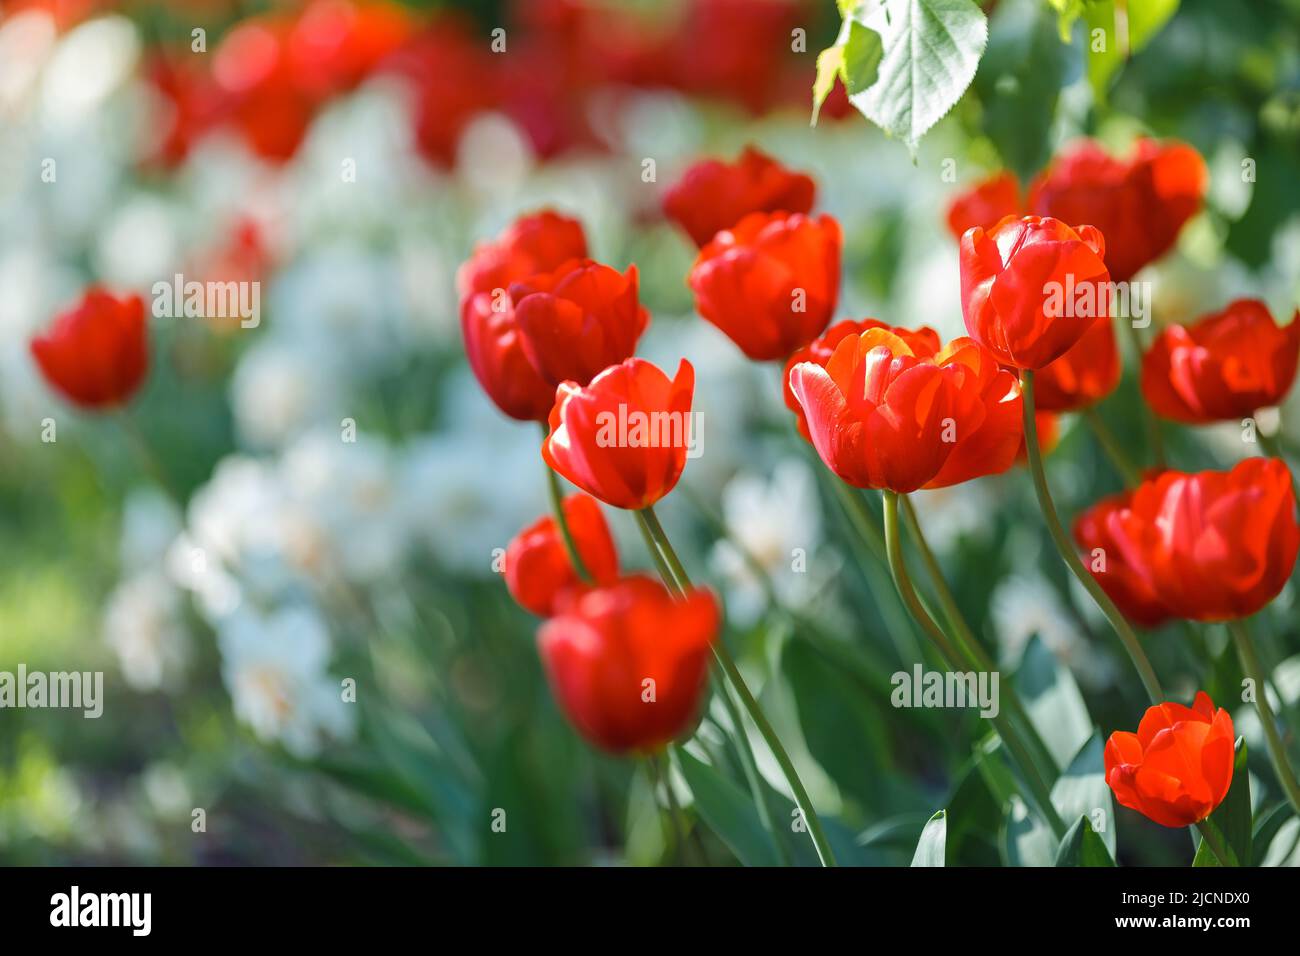 red tulips growing in a flower bed with white flowers, in the spring on a sunny day. Stock Photo